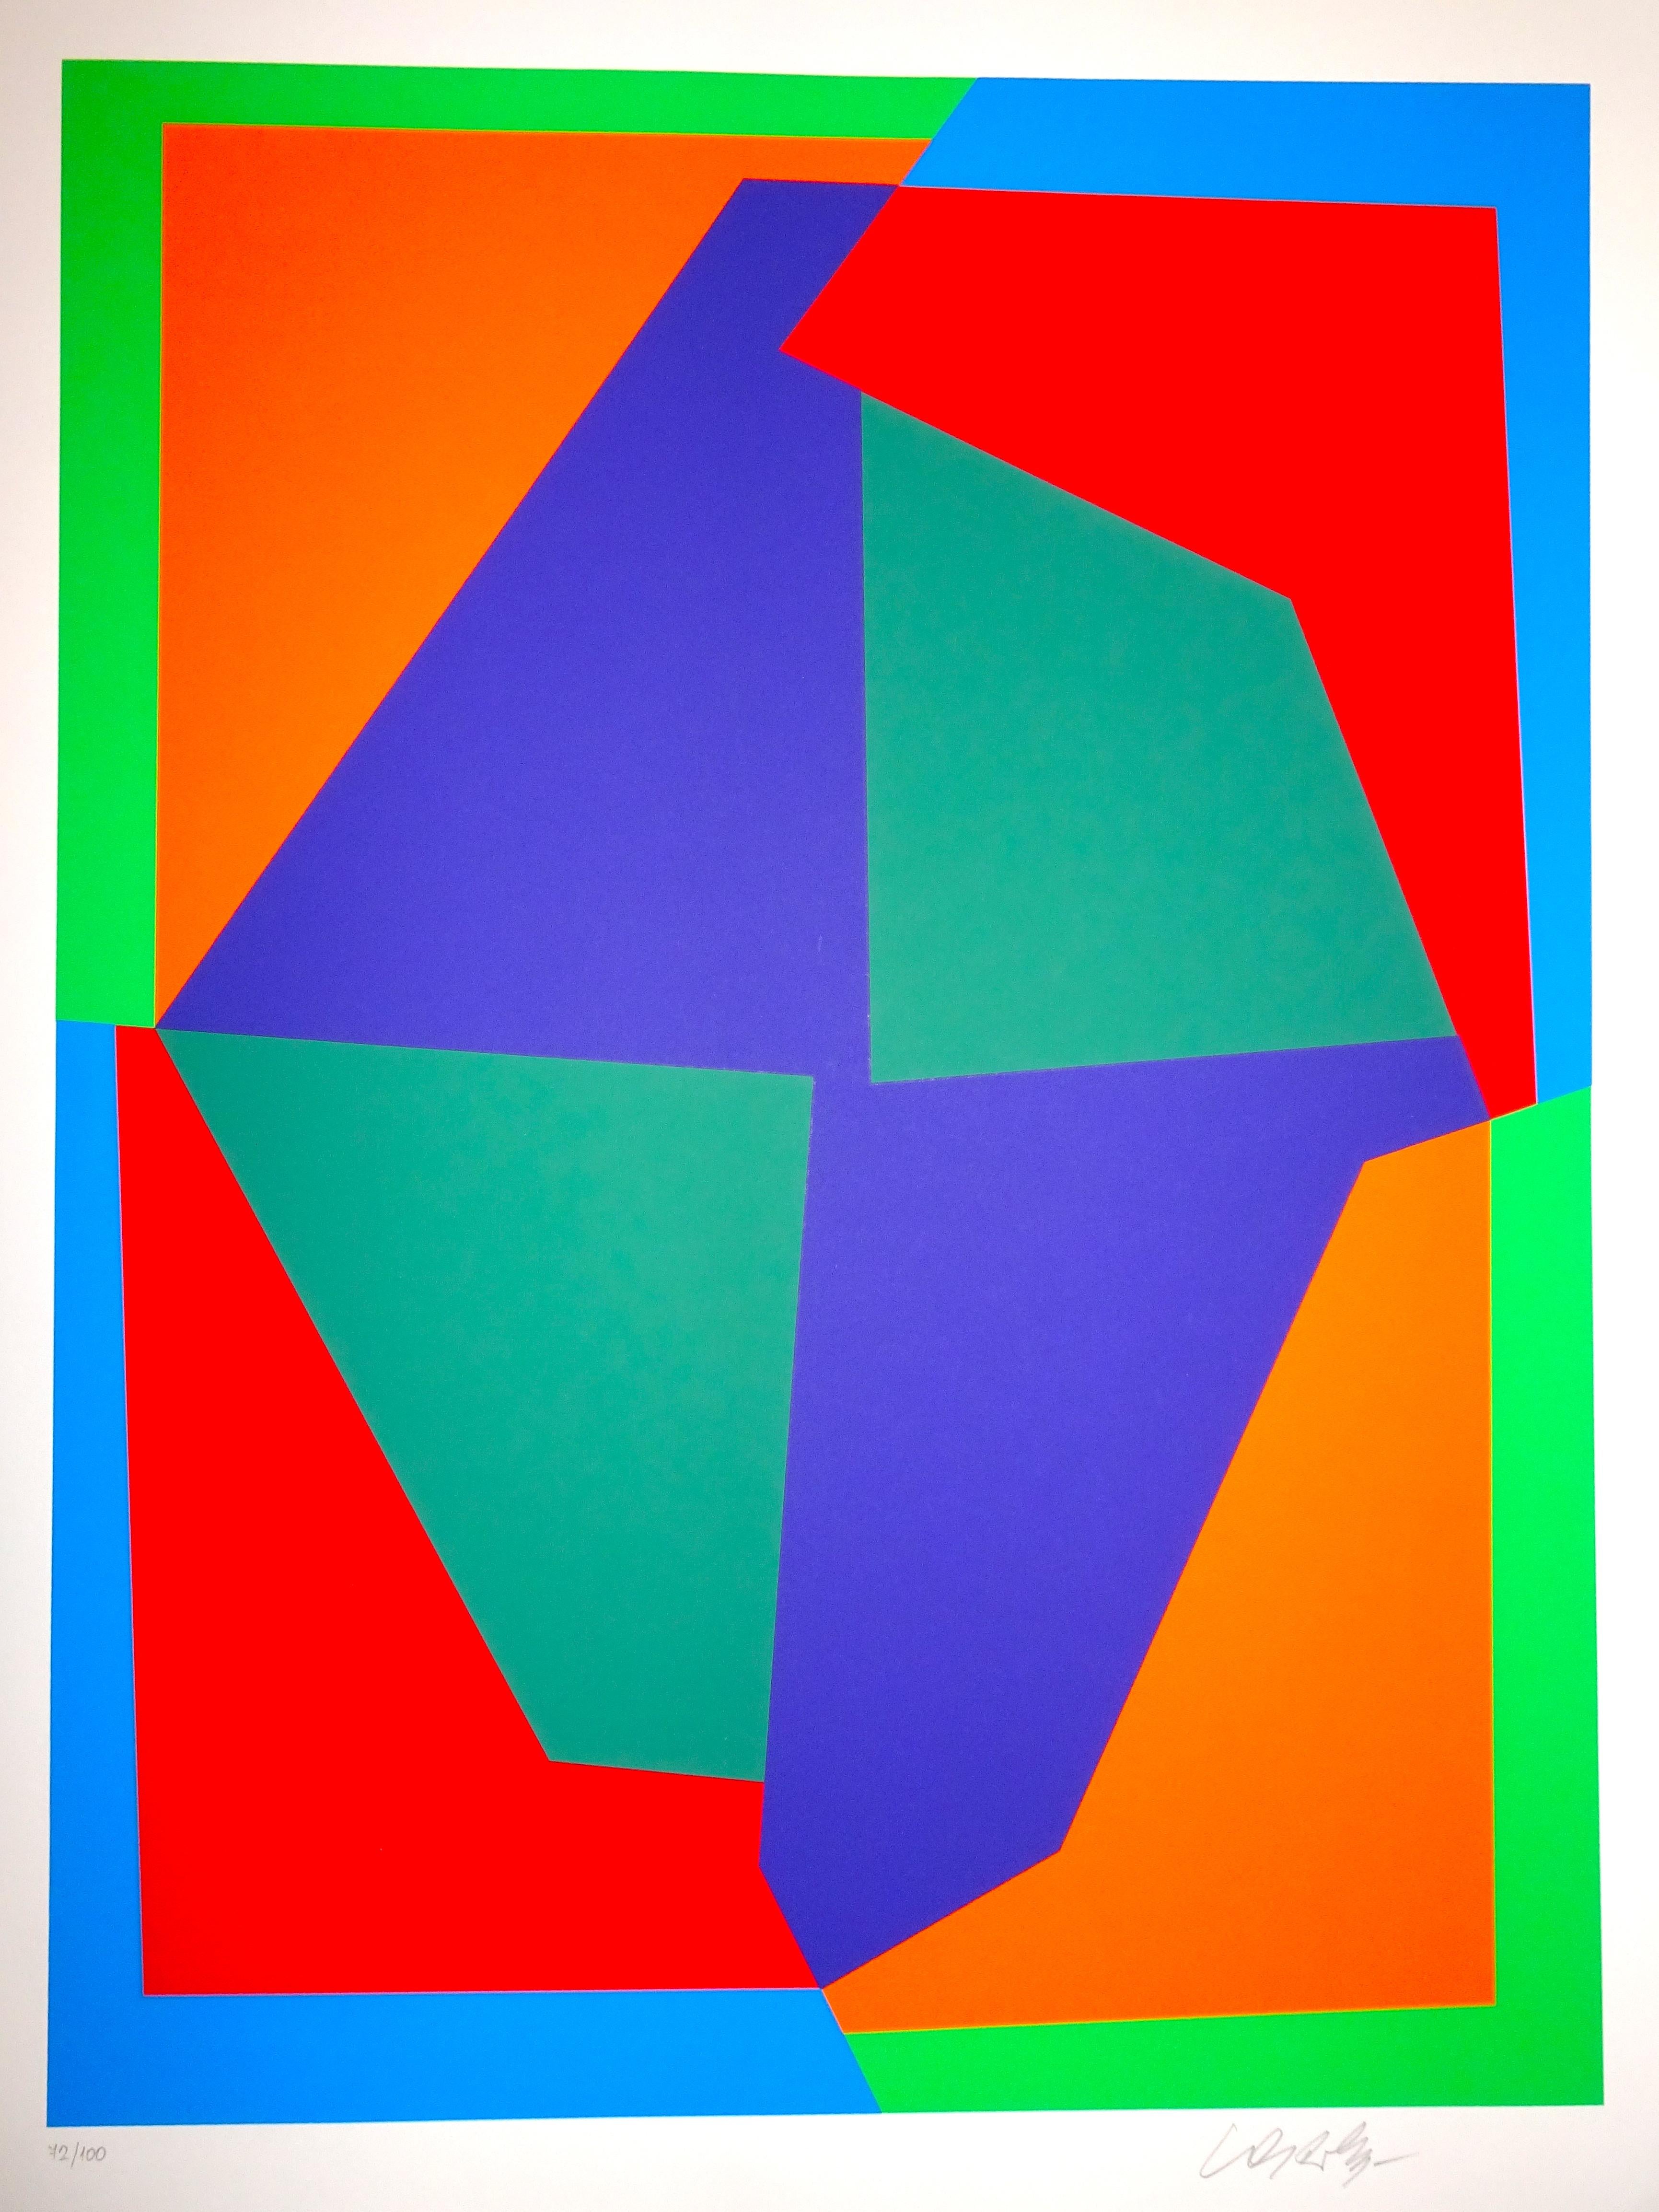 Mixed-Color Composition is a wonderful serigraph representing a blue, red, green, light blue, and orange abstract composition realized by Victor Vasarely.
The plate is from the portfolio Les Années Cinquante edited by Pesti Mühely, Budapest, in